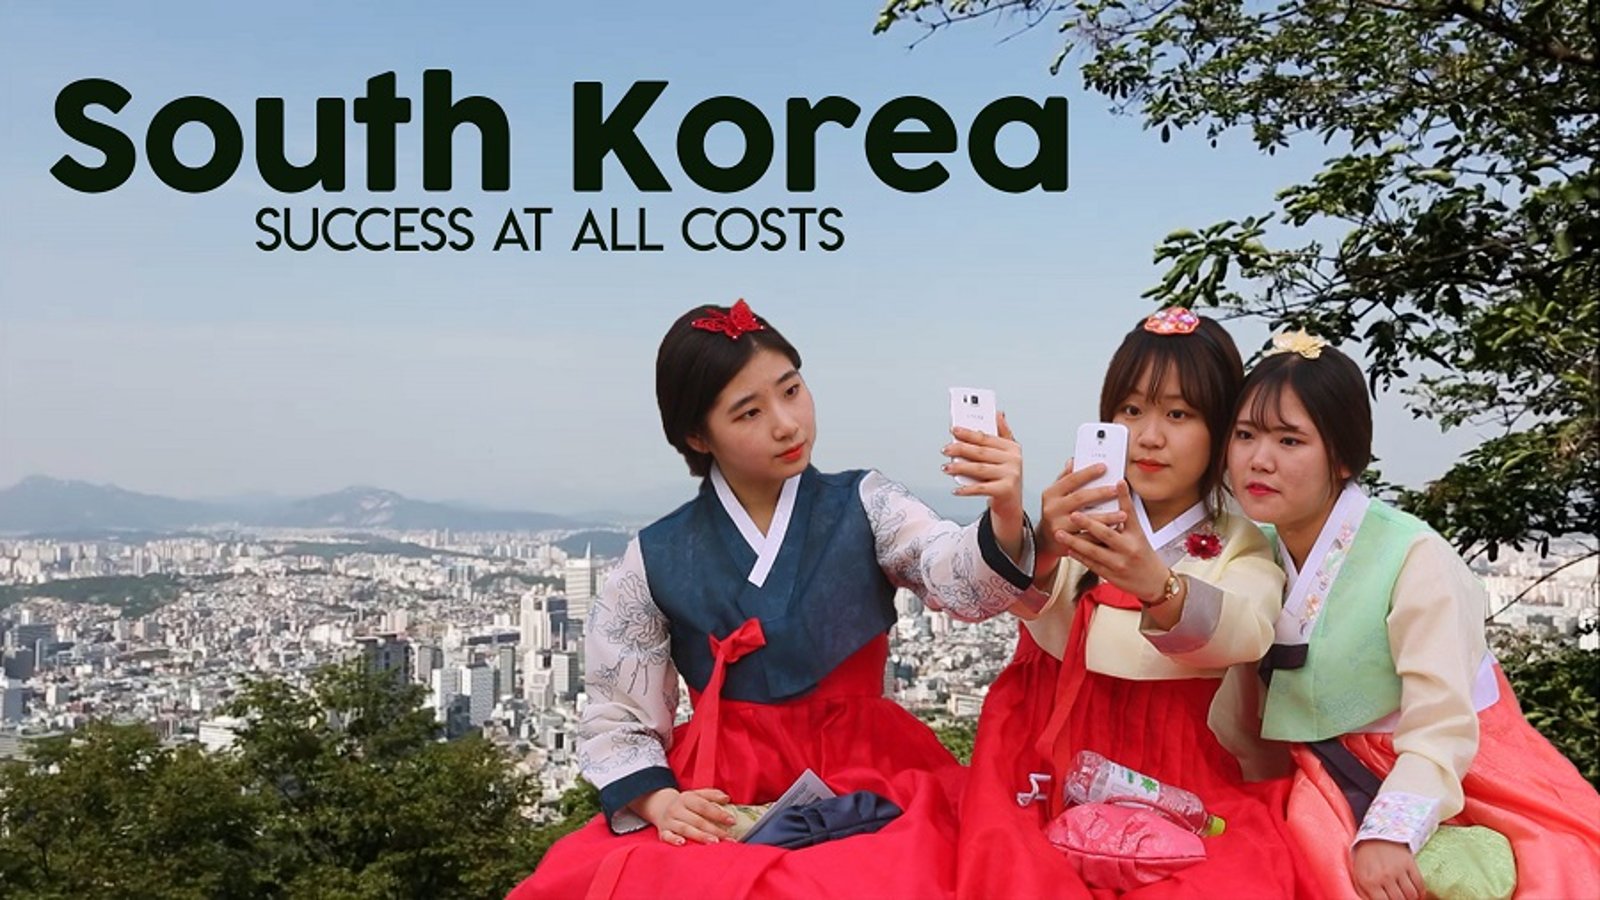 South Korea: Success at all Costs - The Successes and Pitfalls of a Major Economic Power